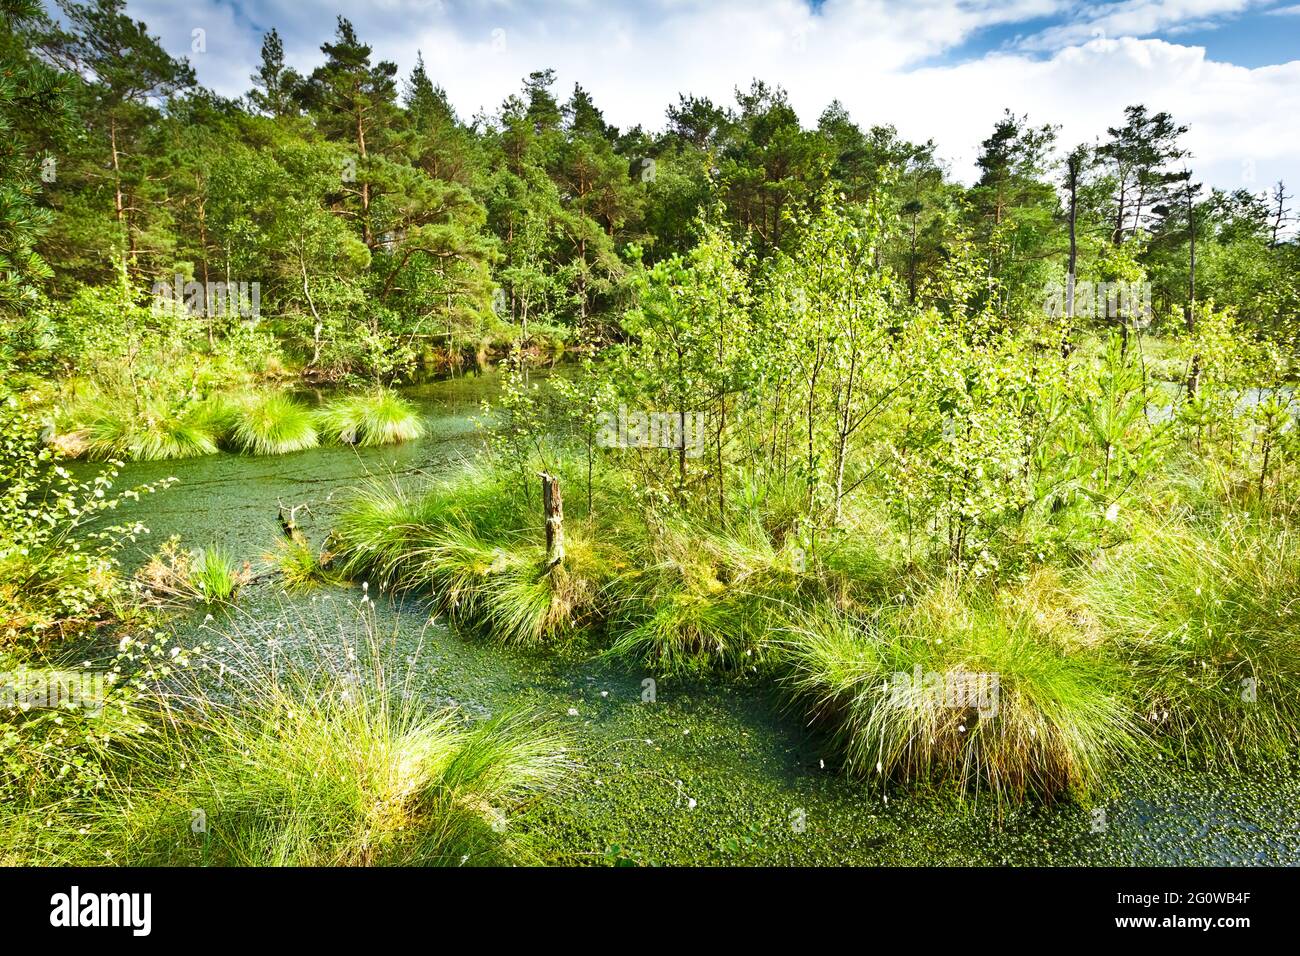 The peat bog Pietzmoor in the nature reserve Lueneburger Heide in northern Germany. Stock Photo